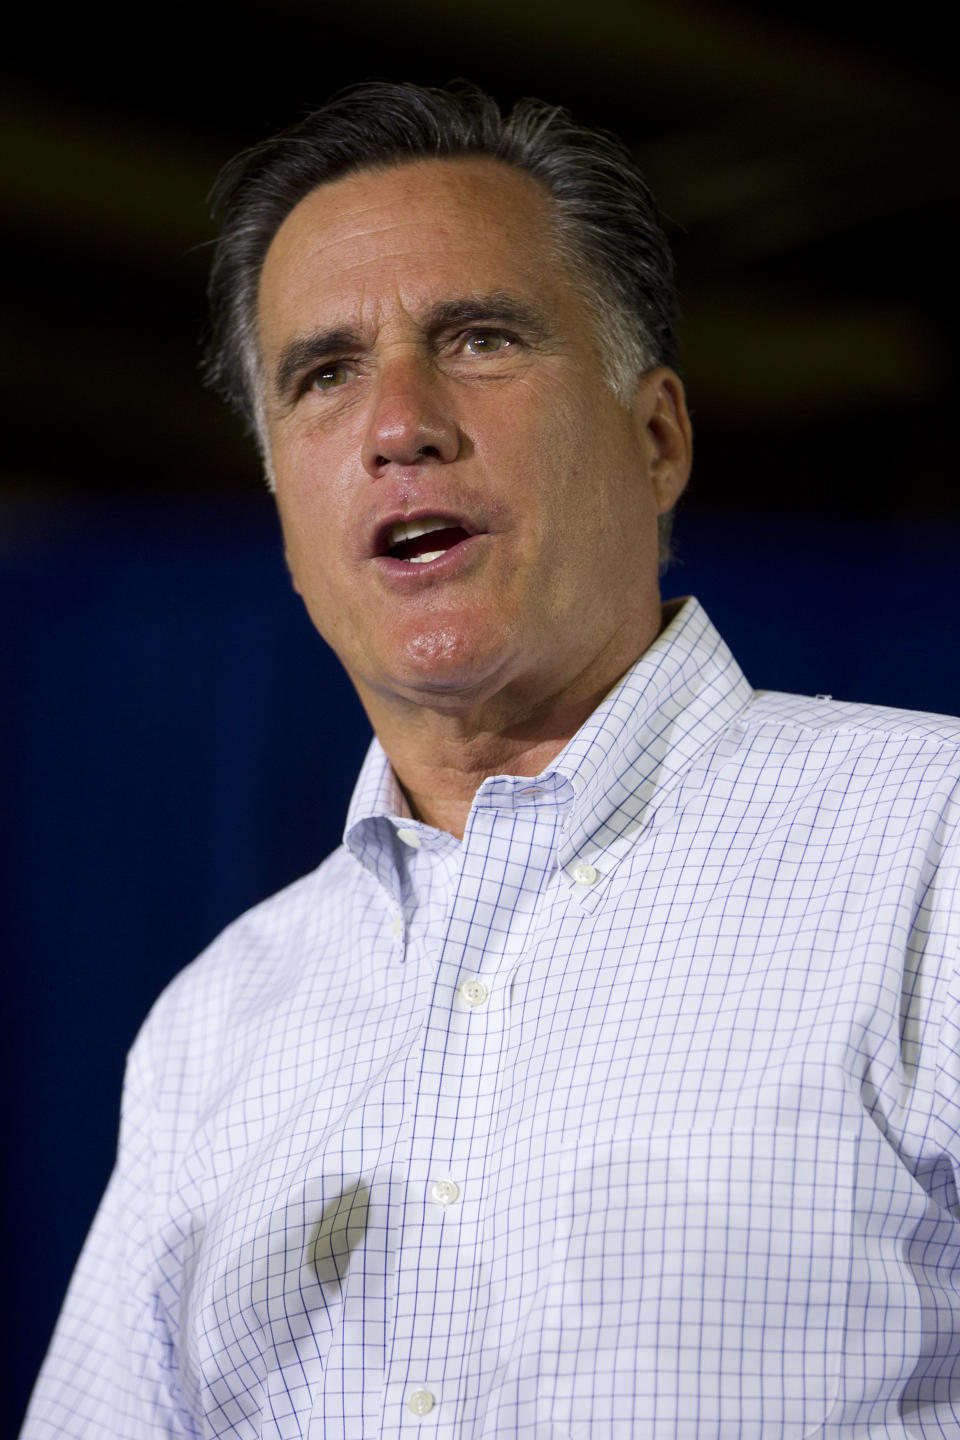 Republican presidential candidate, former Massachusetts Gov. Mitt Romney speaks during a campaign stop at Monterey Mills on Monday, June 18, 2012 in Janesville, Wis. (AP Photo/Evan Vucci)